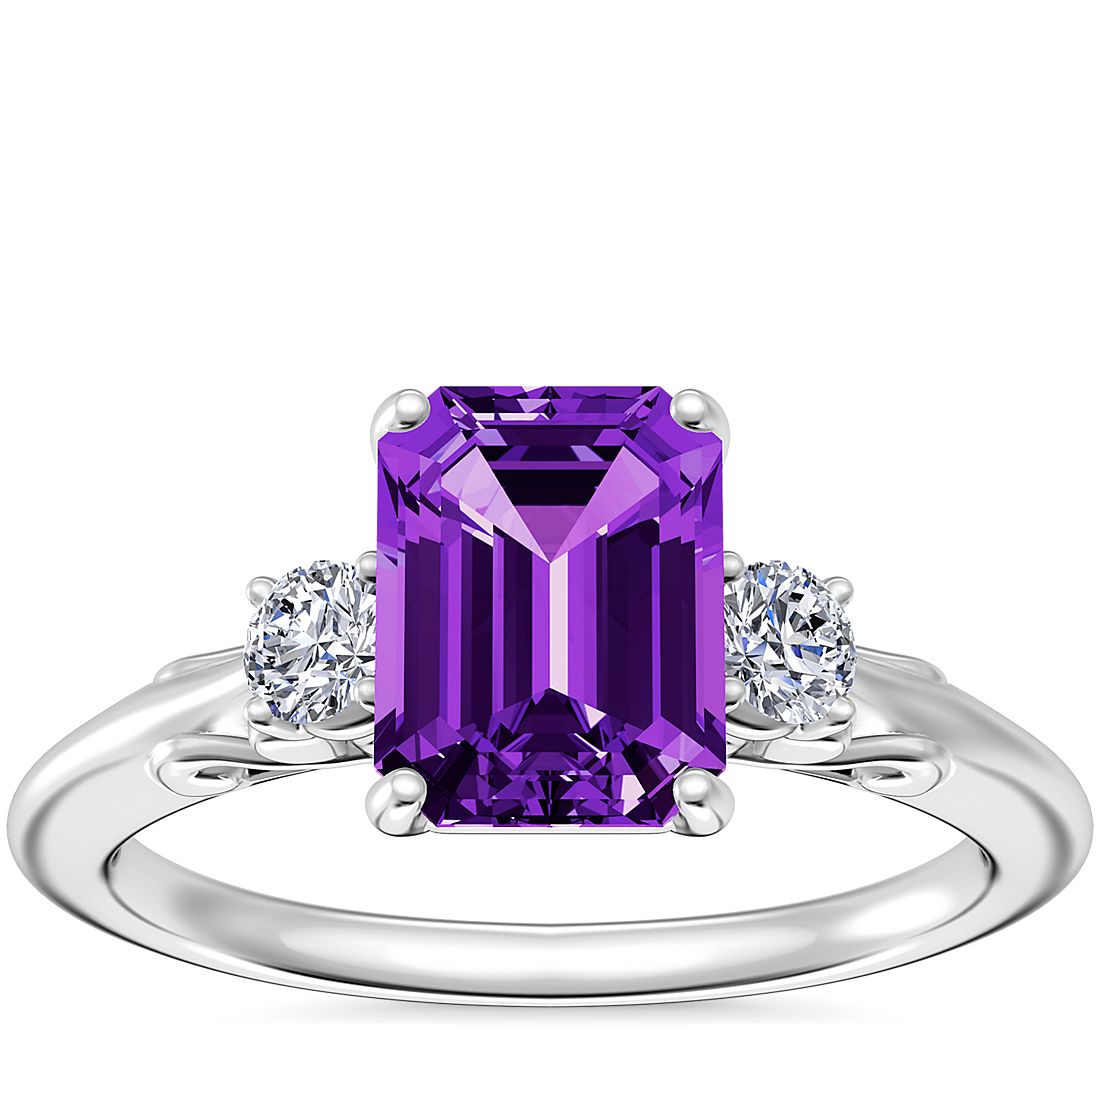 Vintage Three Stone Engagement Ring with Emerald-Cut Amethyst in Platinum (8x6mm)